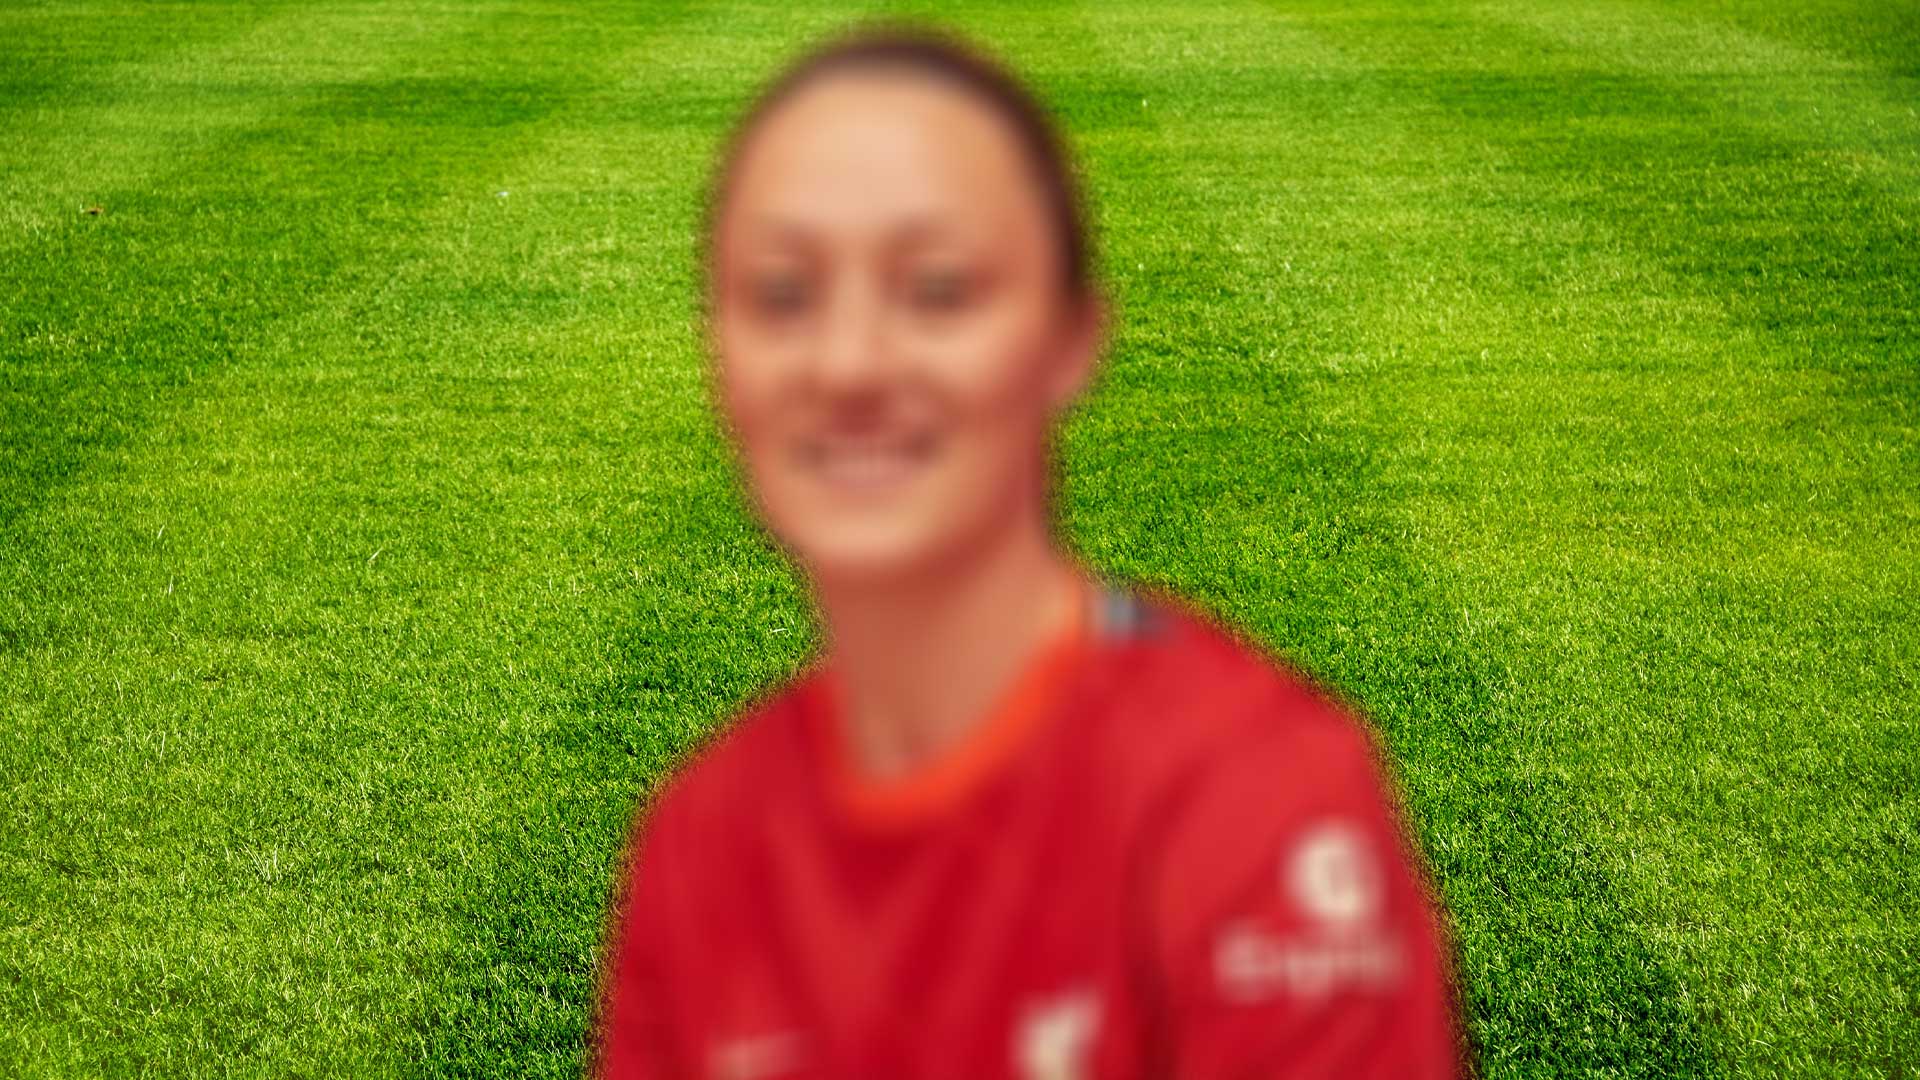 A blurred image of a footballer in a red shirt